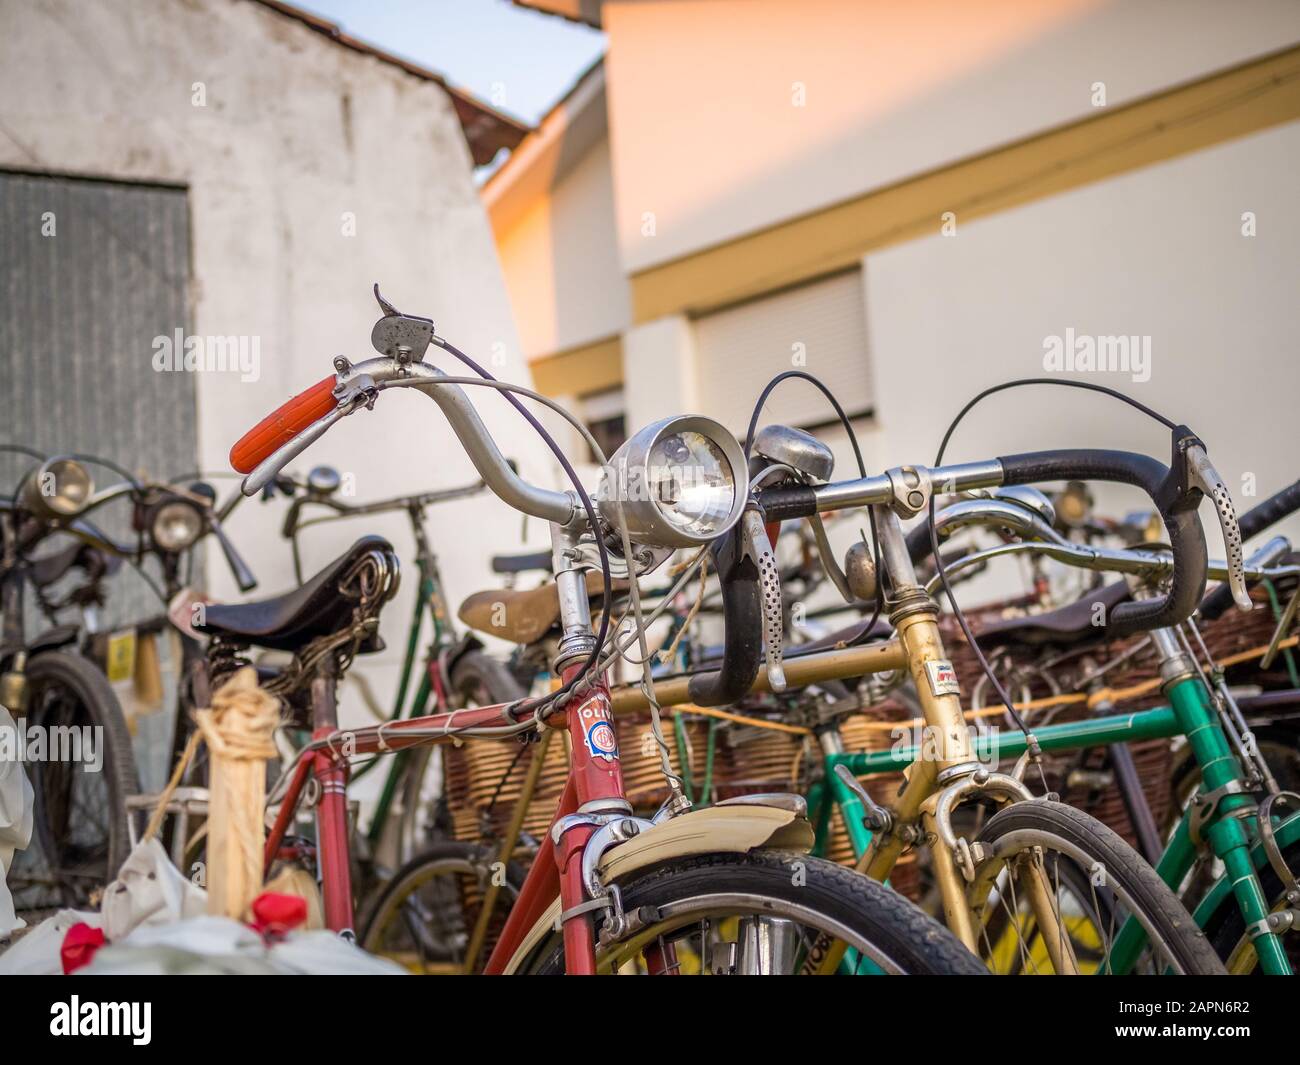 ALCOBAçA, PORTUGAL - Aug 19, 2018: Huge vintage bicycle parking. Many people use bicycles daily in European cities. Stock Photo